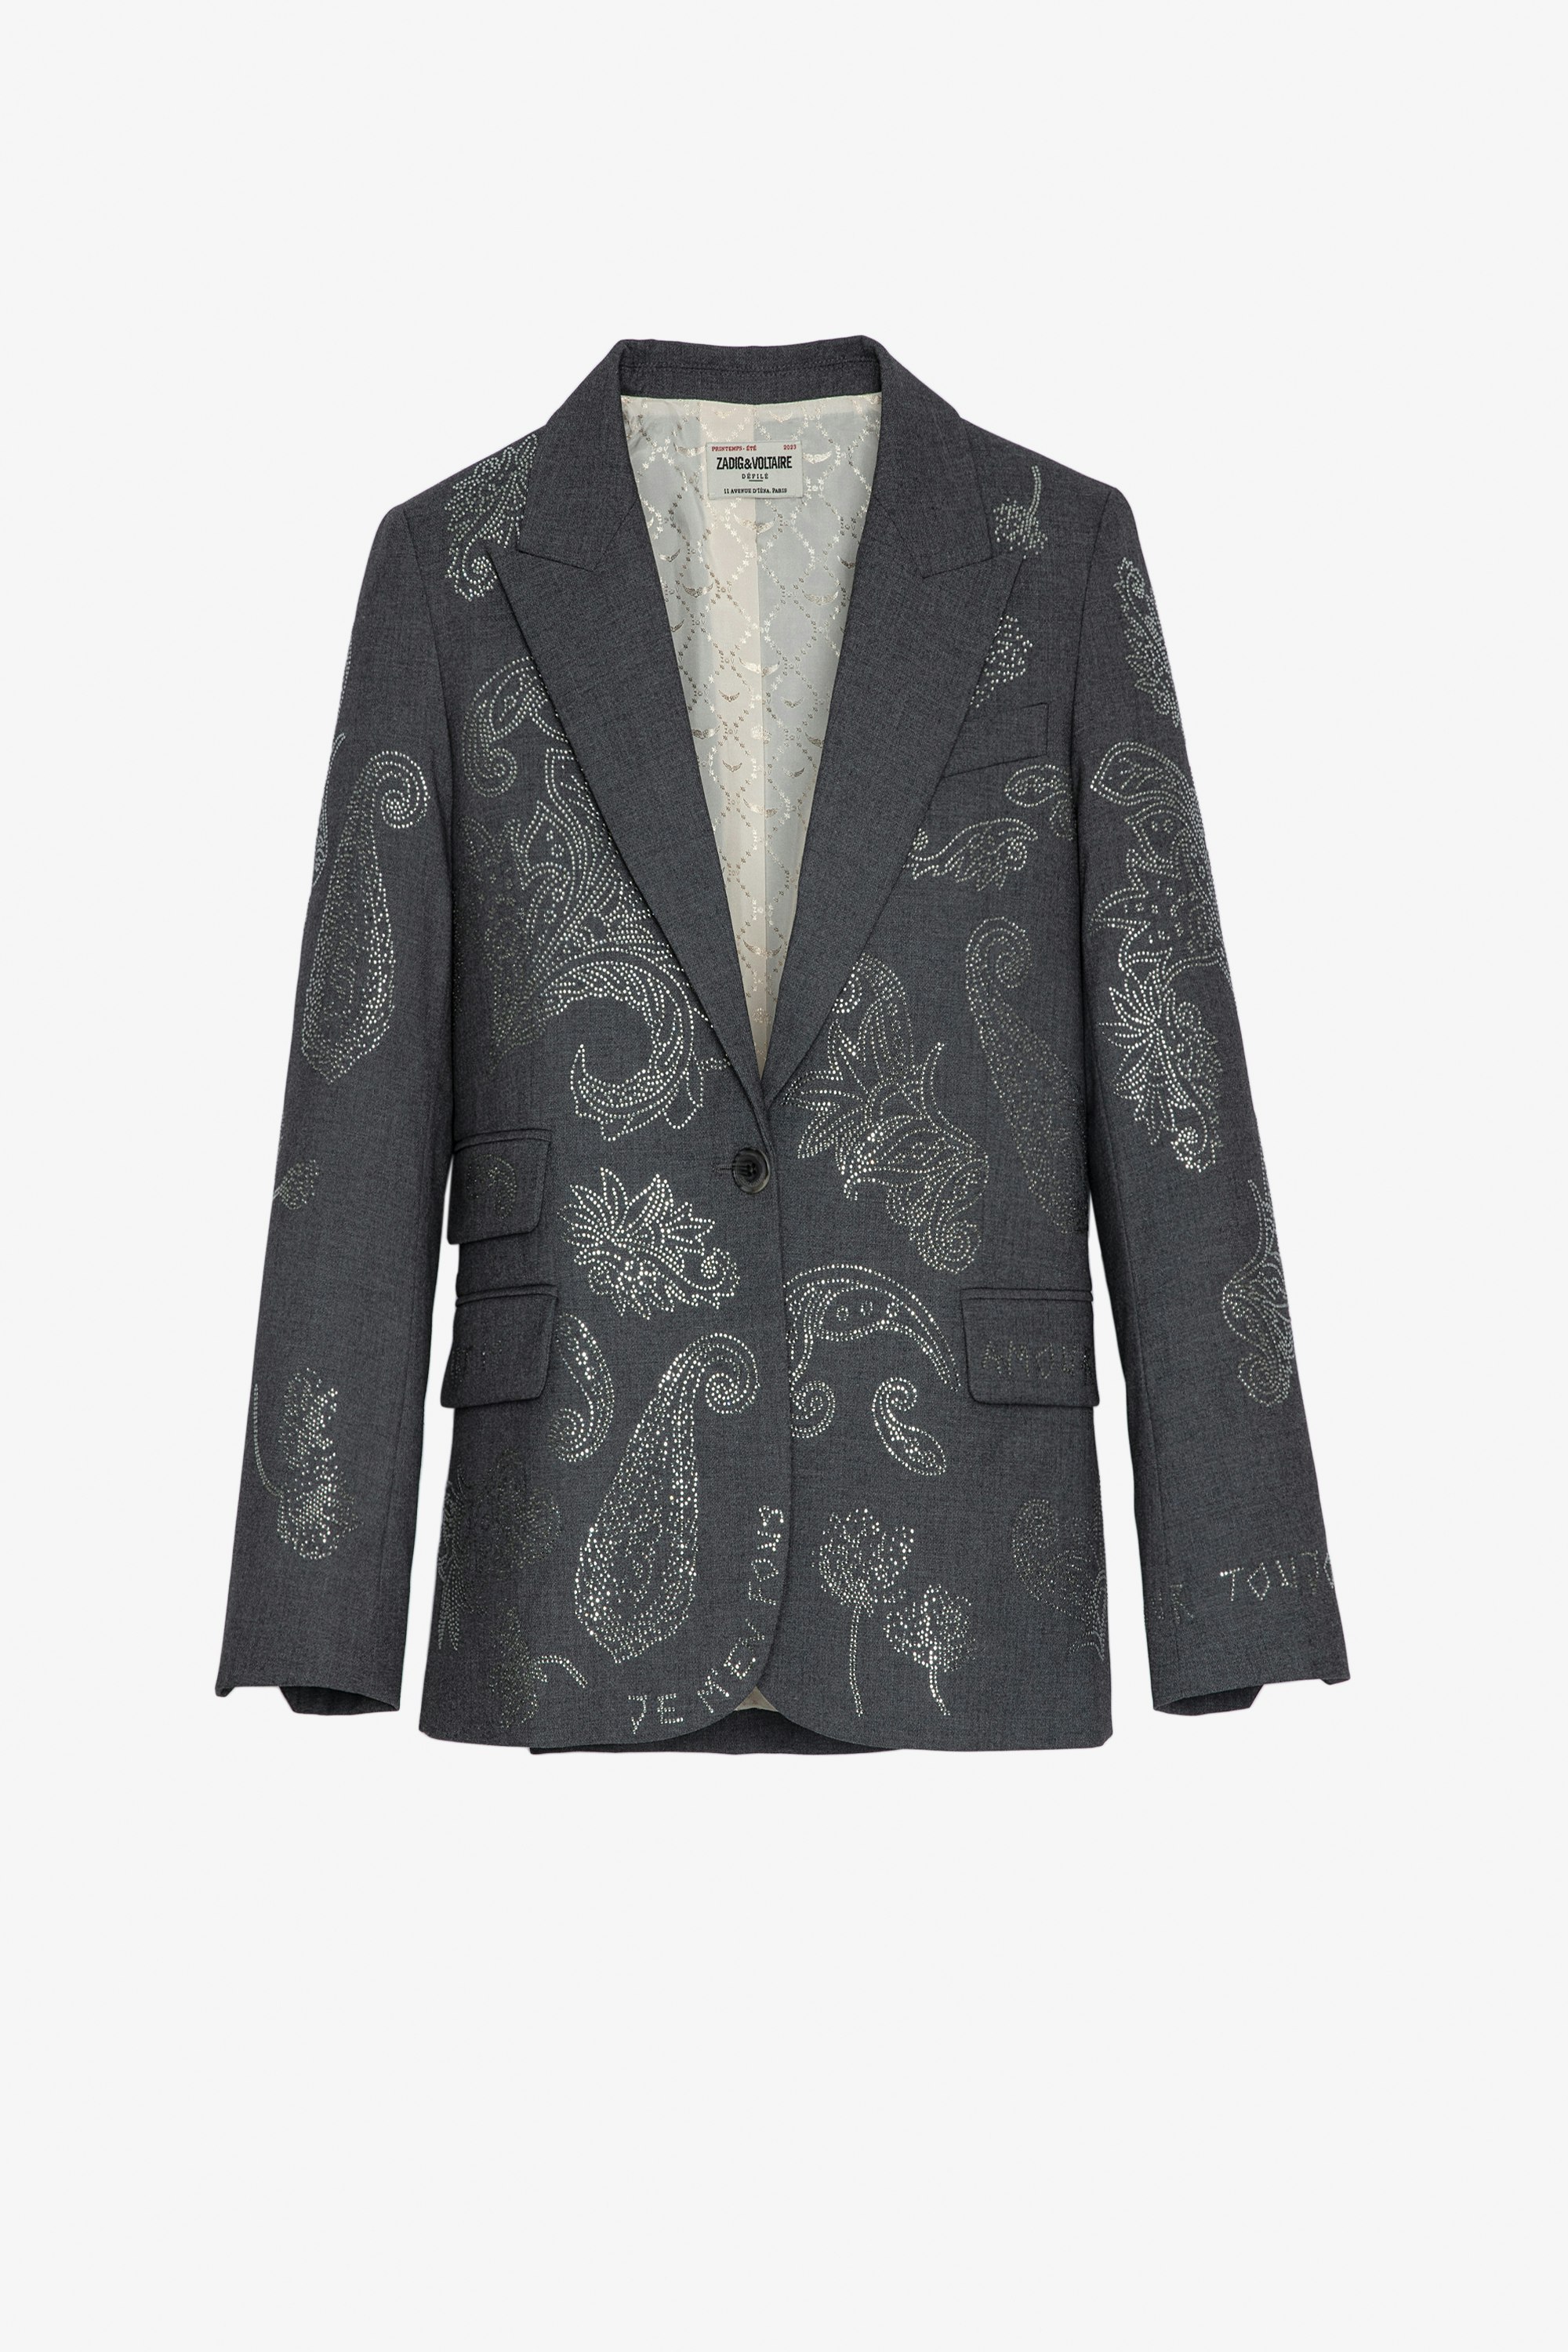 Venus Jacket Women’s grey tailored jacket with paisley pattern decorated with crystals